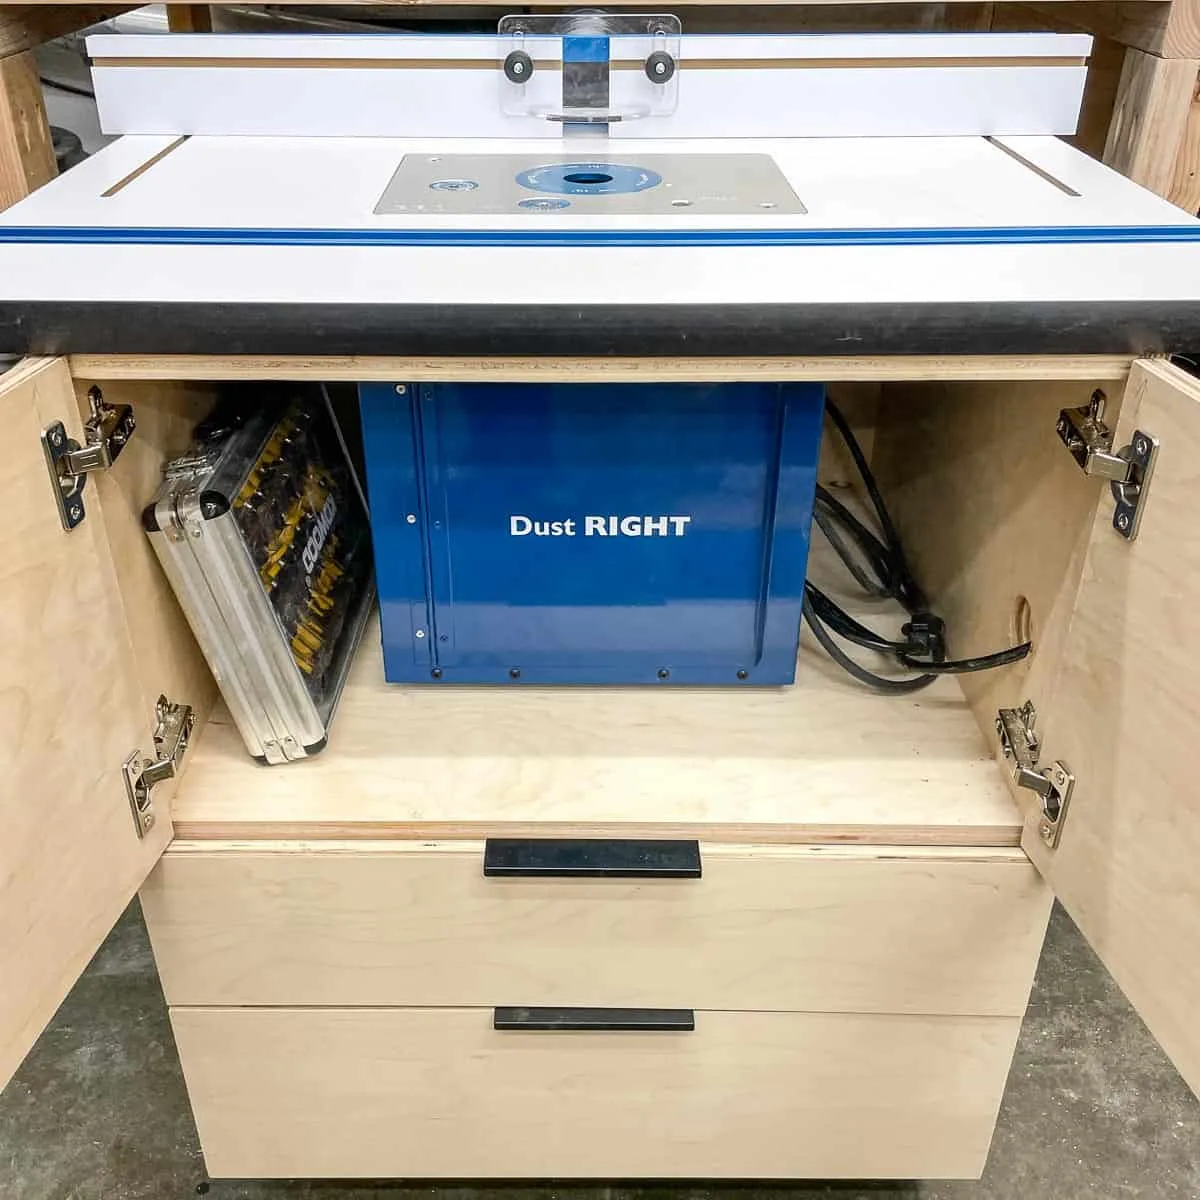 DIY router table with cabinet doors open to reveal dust bucket and router bit set